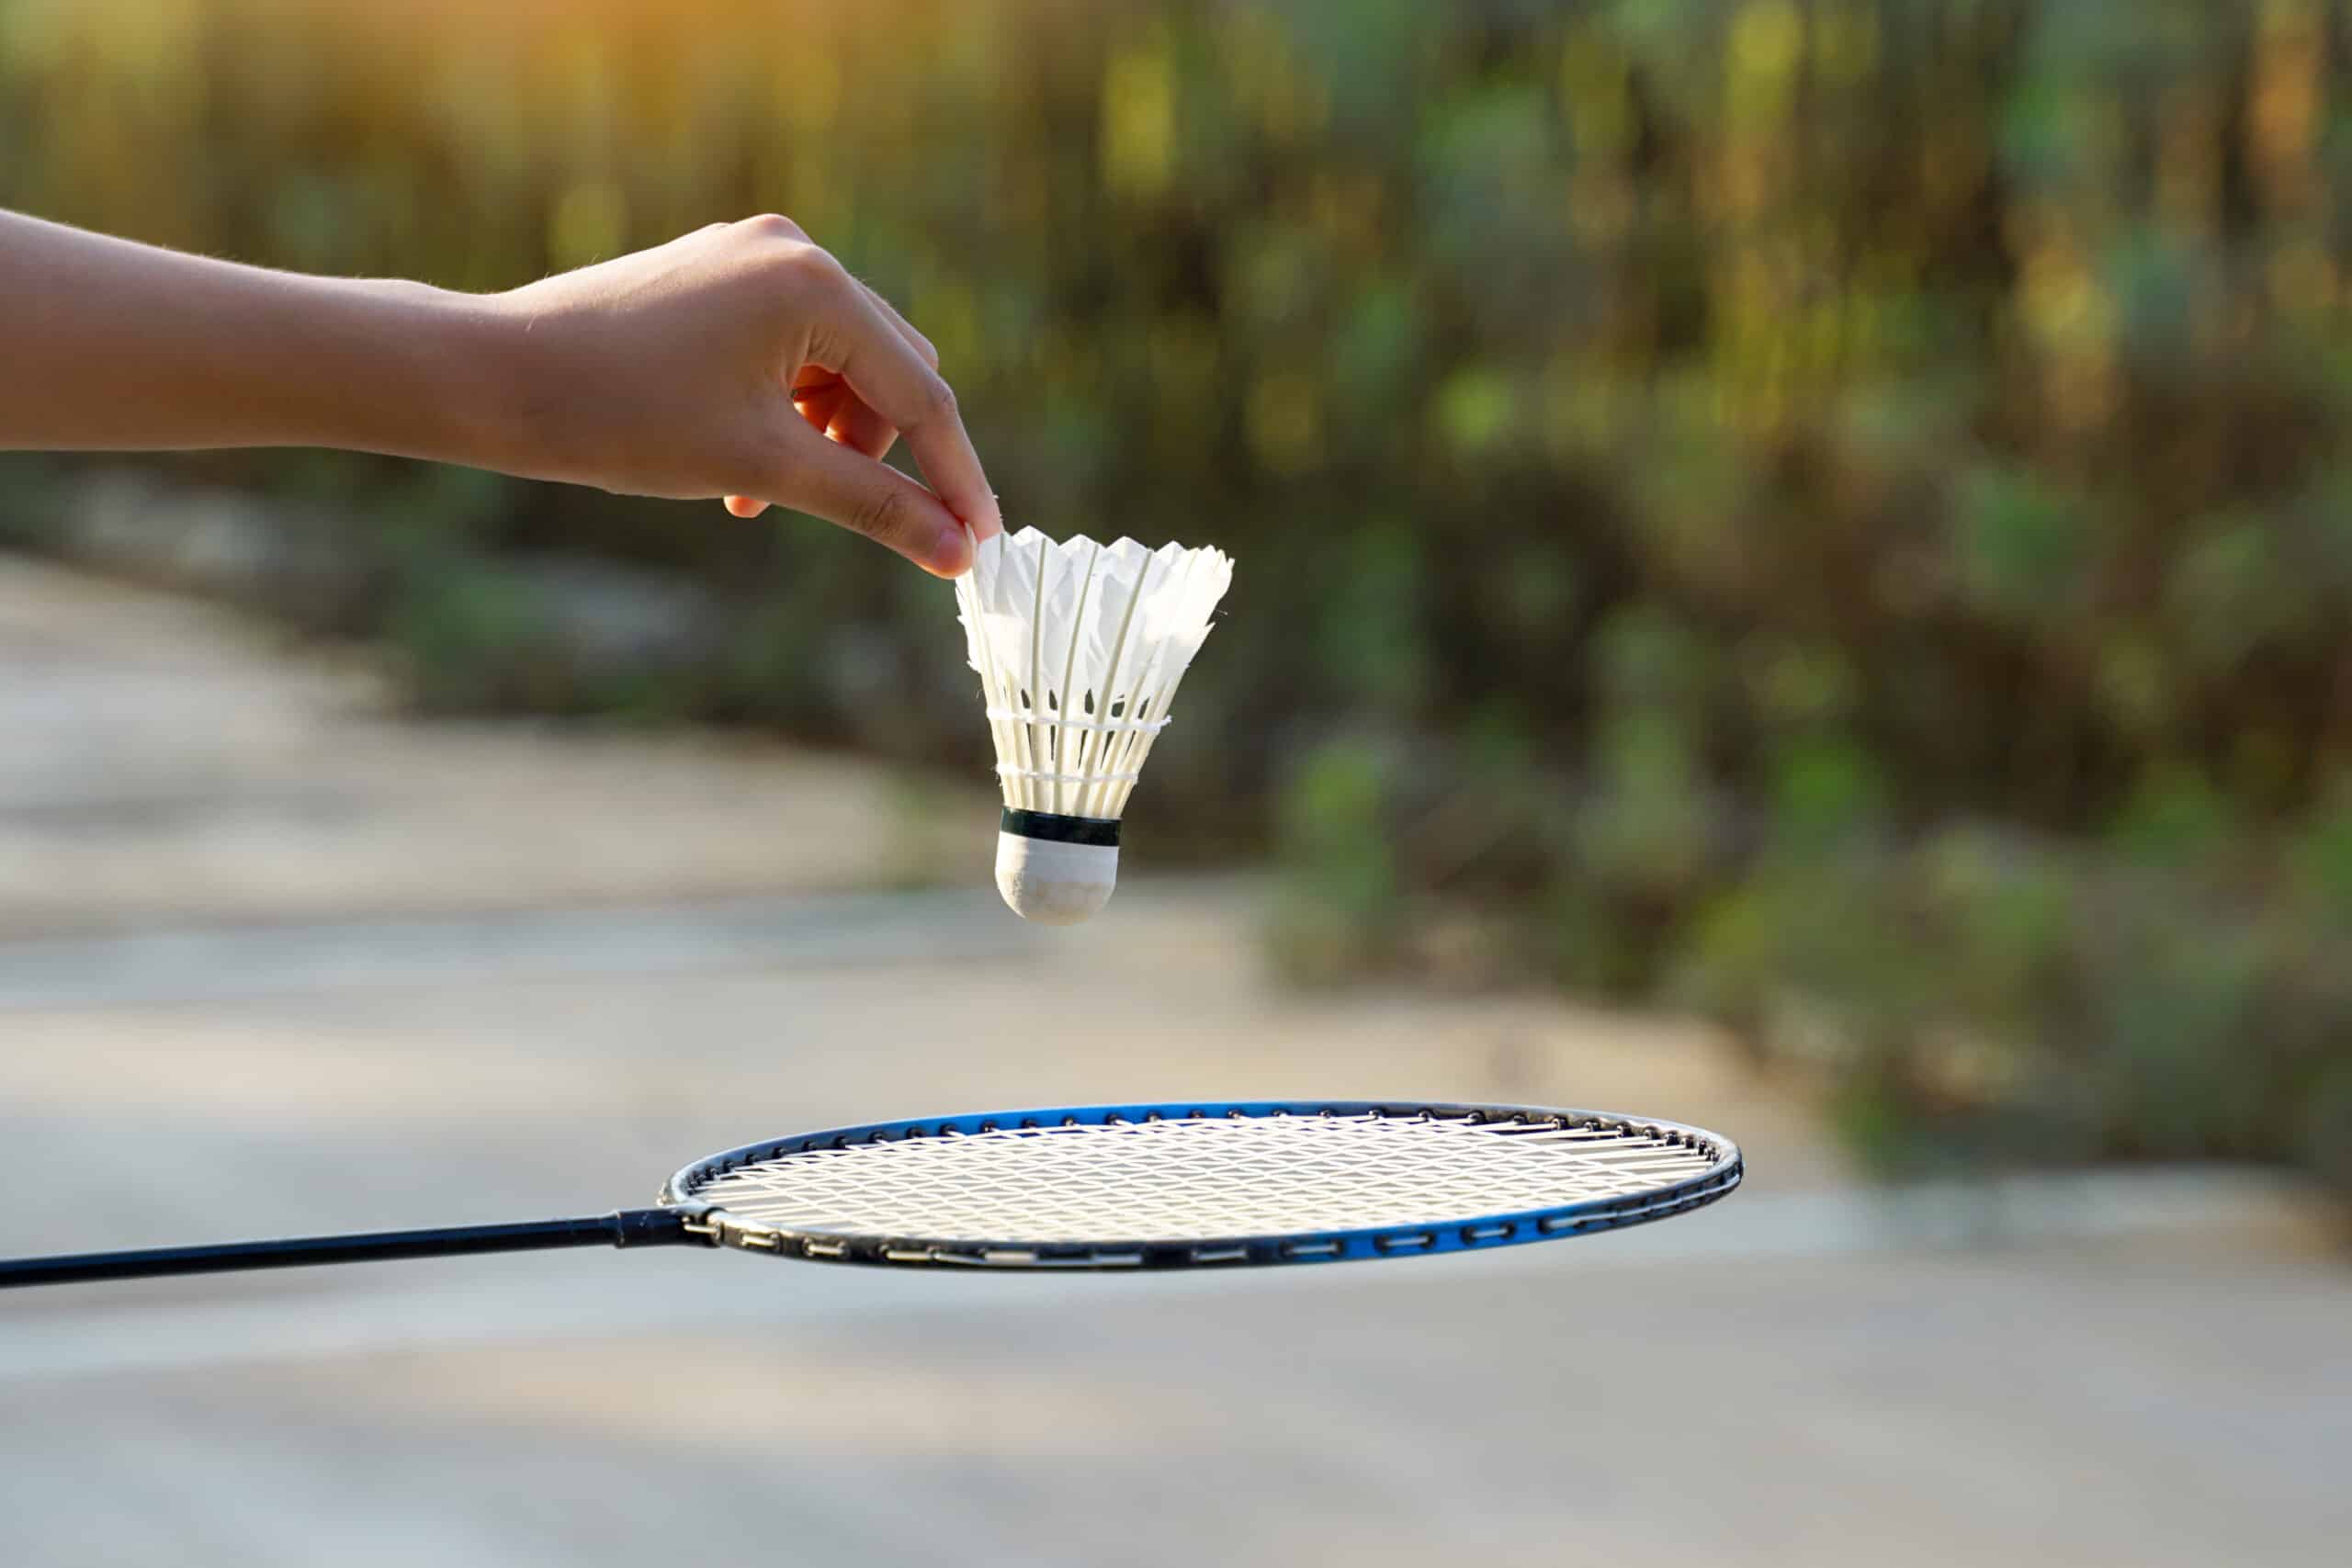 www.appr.com : What is the difference between indoor and outdoor badminton?